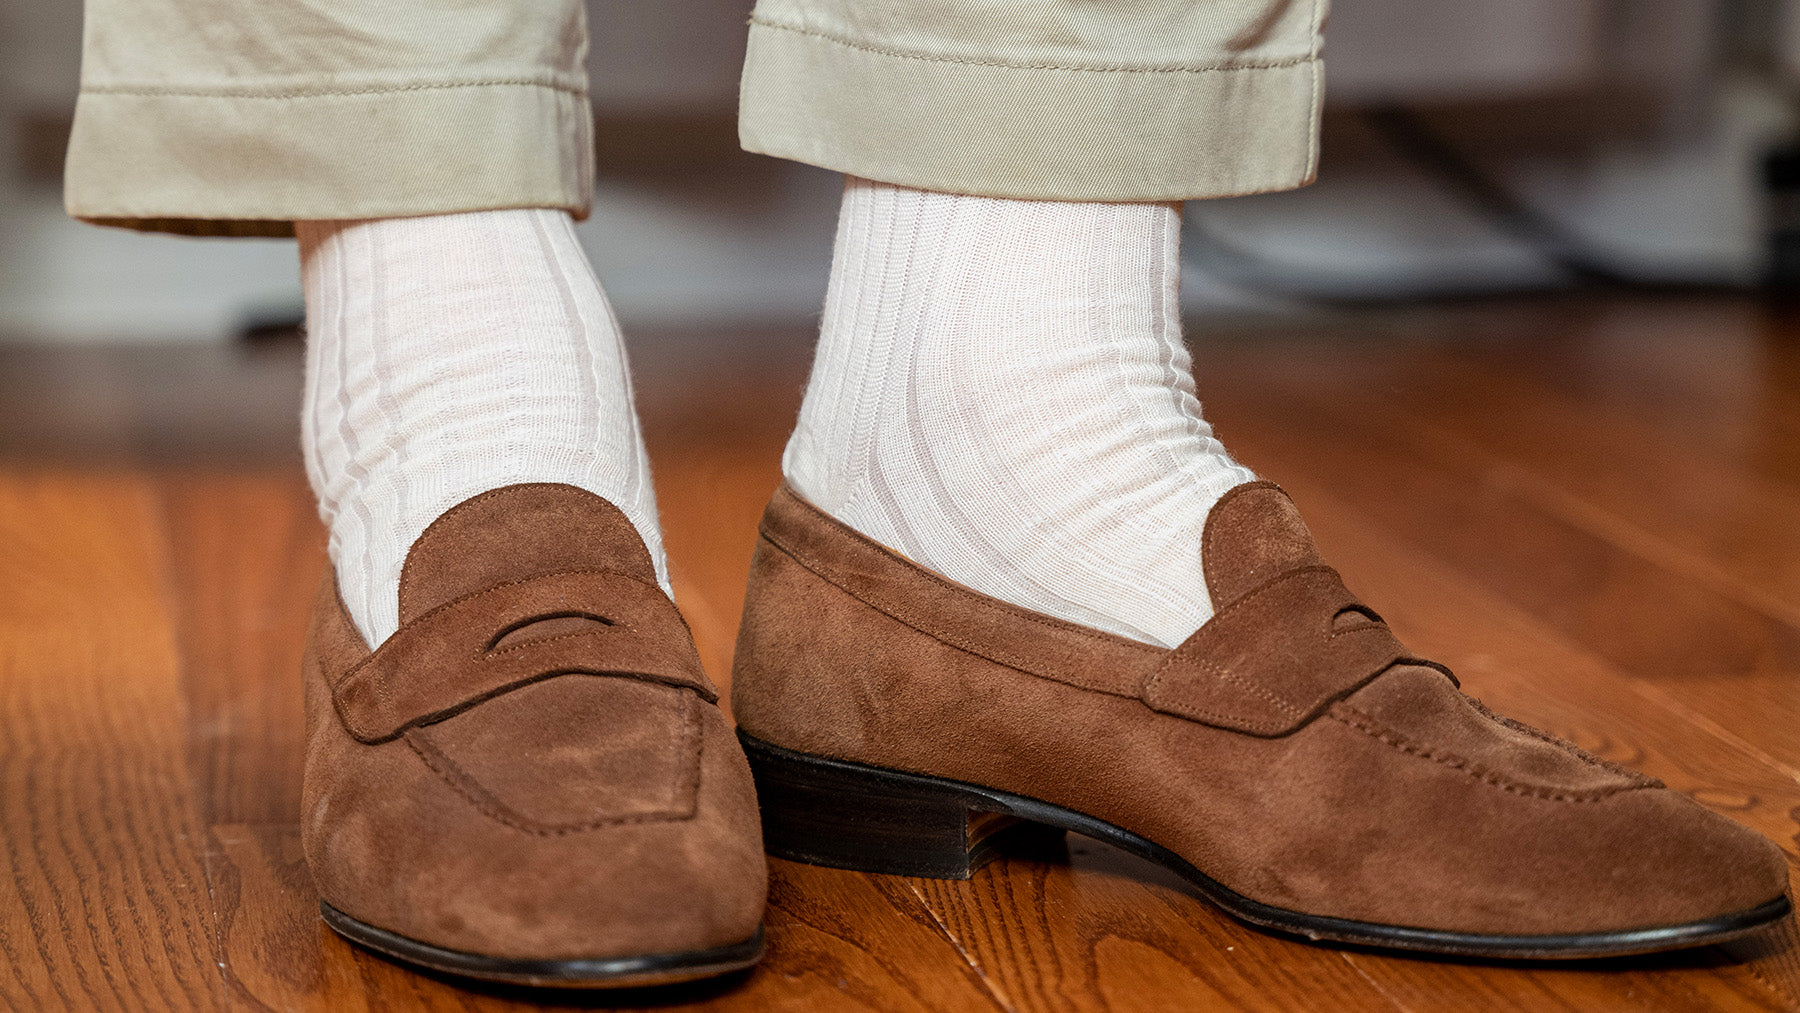 Cream Dress Socks Should Be In Your Style Rotation – Here's Why - Boardroom  Socks